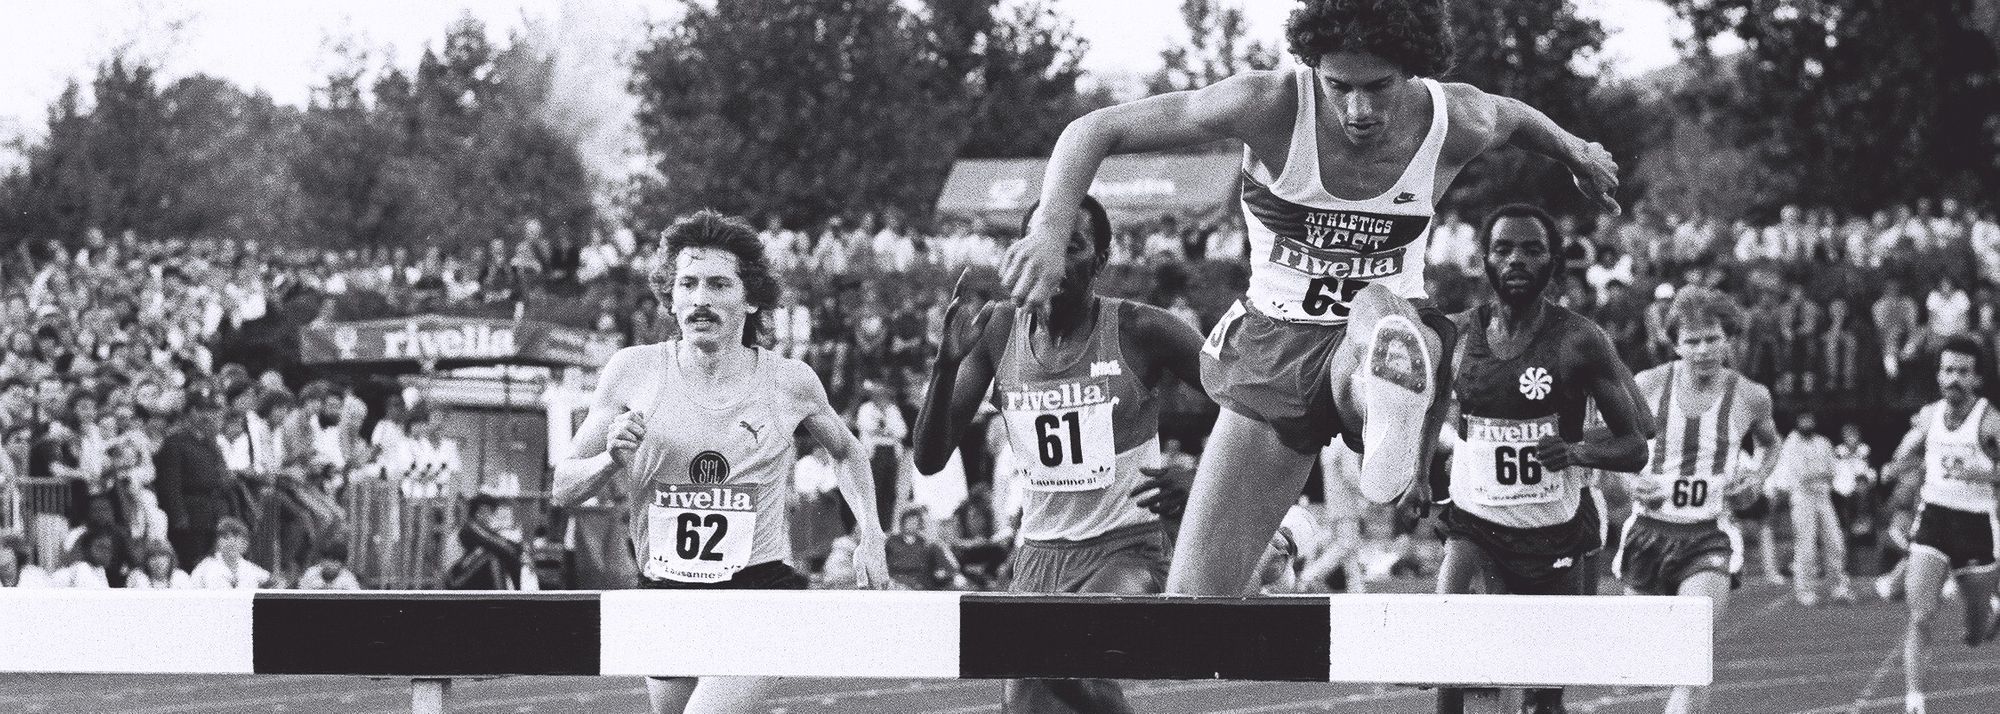 Athletissima has been entertaining crowds of spectators in Lausanne for 45 years